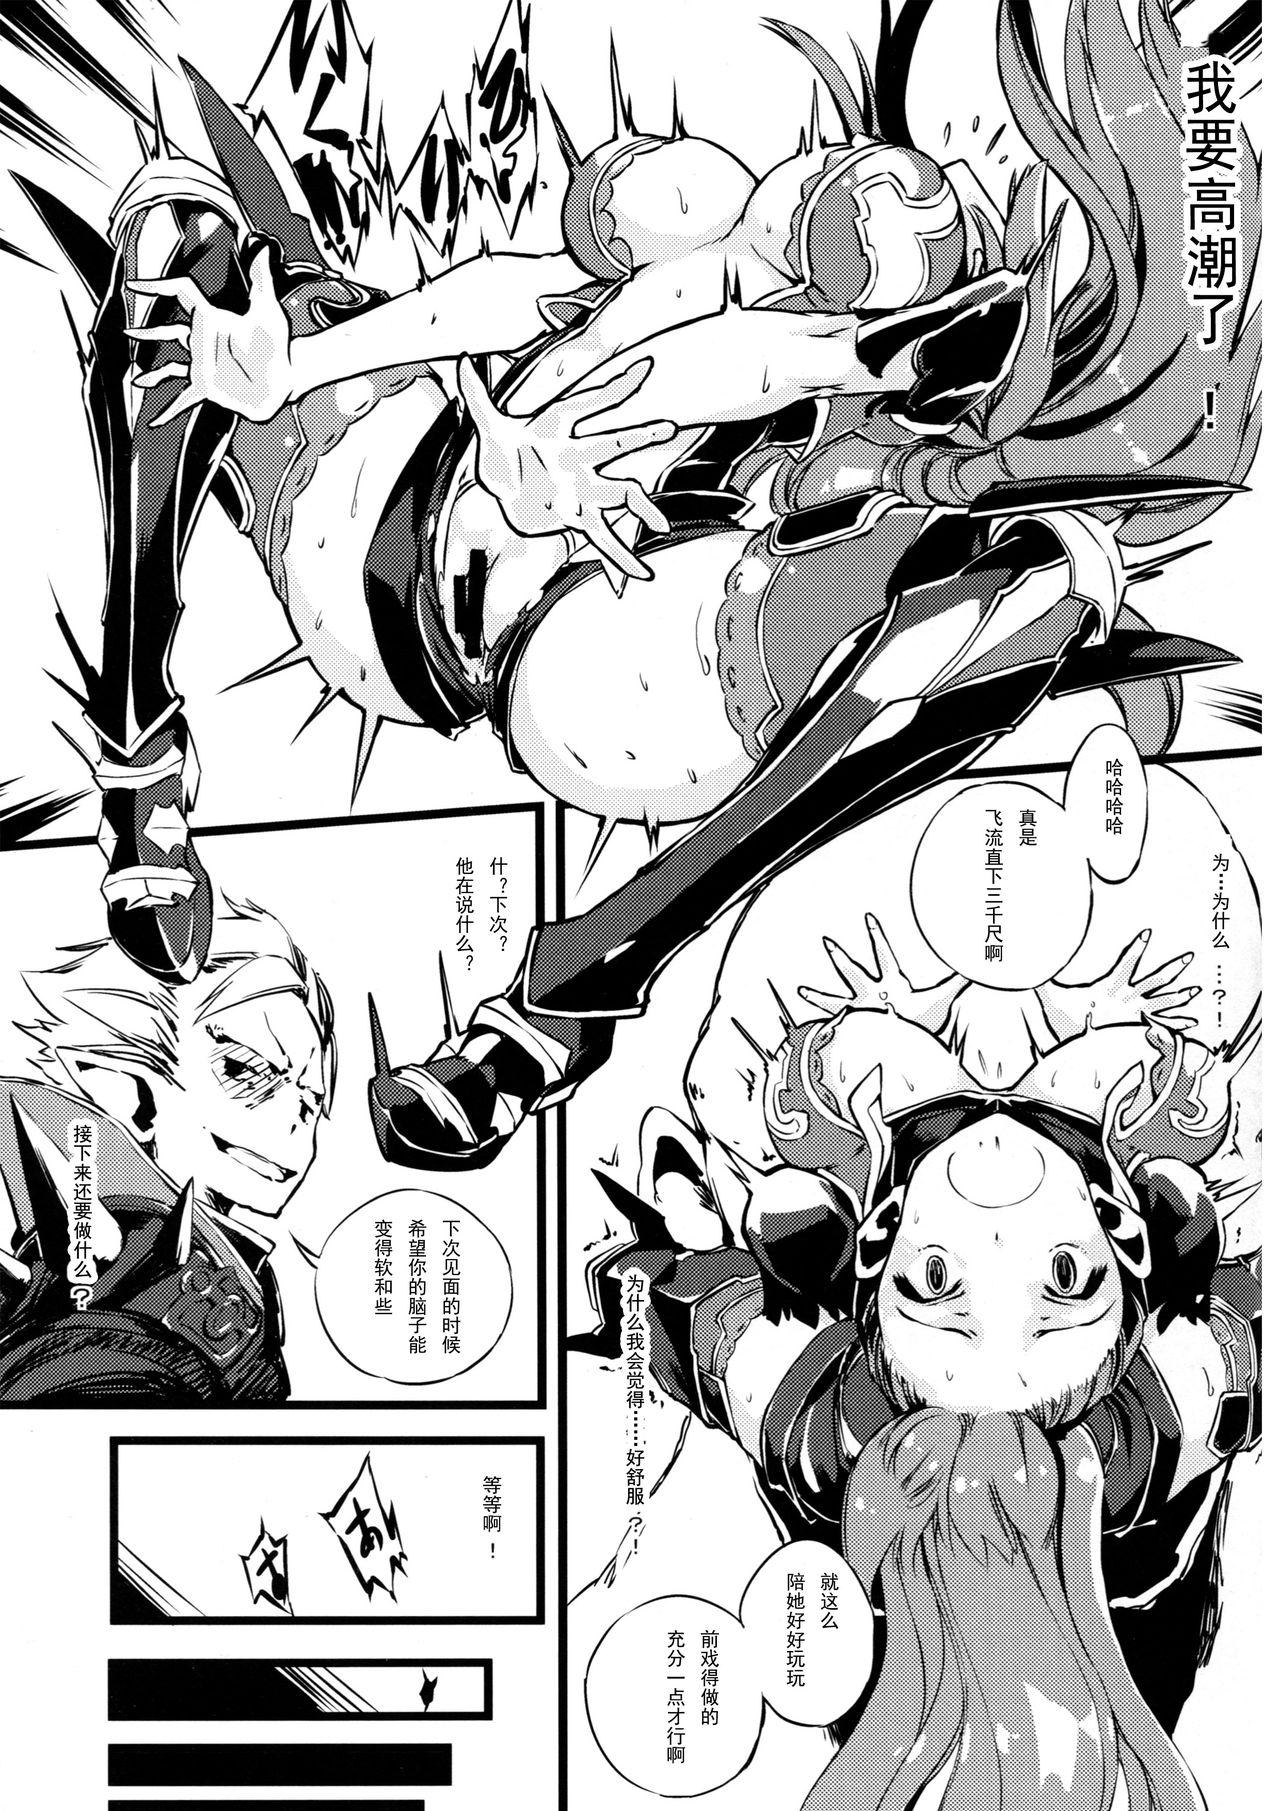 Two Bad End Catharsis Vol.3 - Granblue fantasy Twink - Page 6